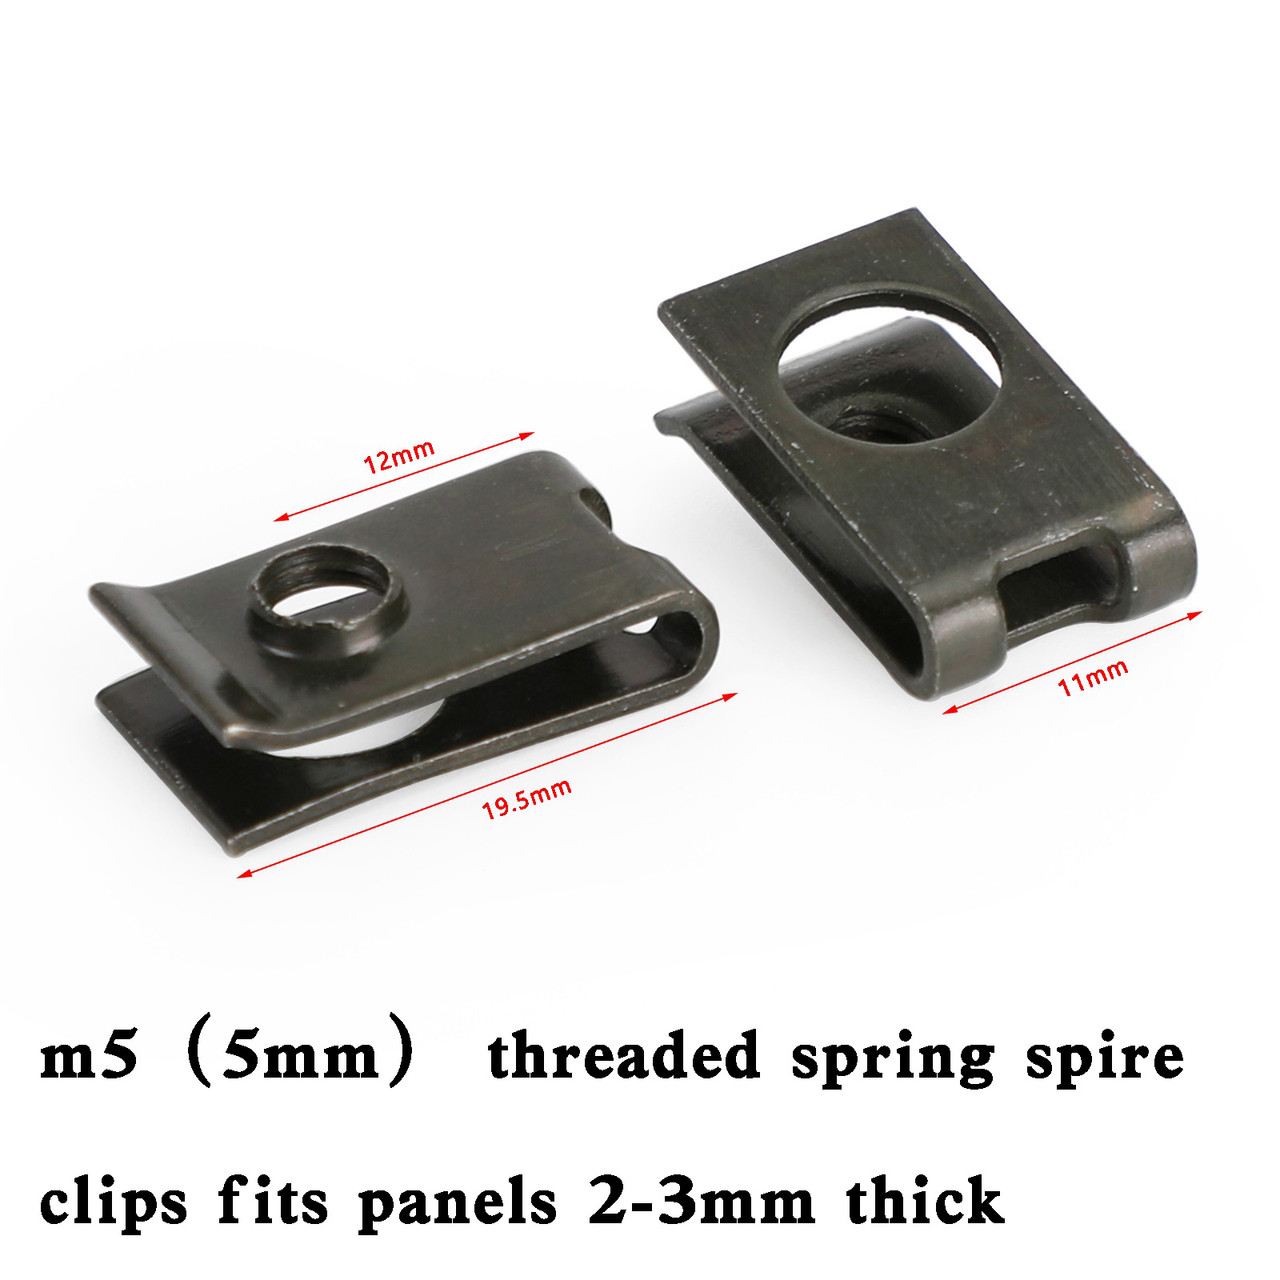 20x Small M5 5mm Motorcycle Fairing Spring Clips Speed Spire Nuts Clip U Nut